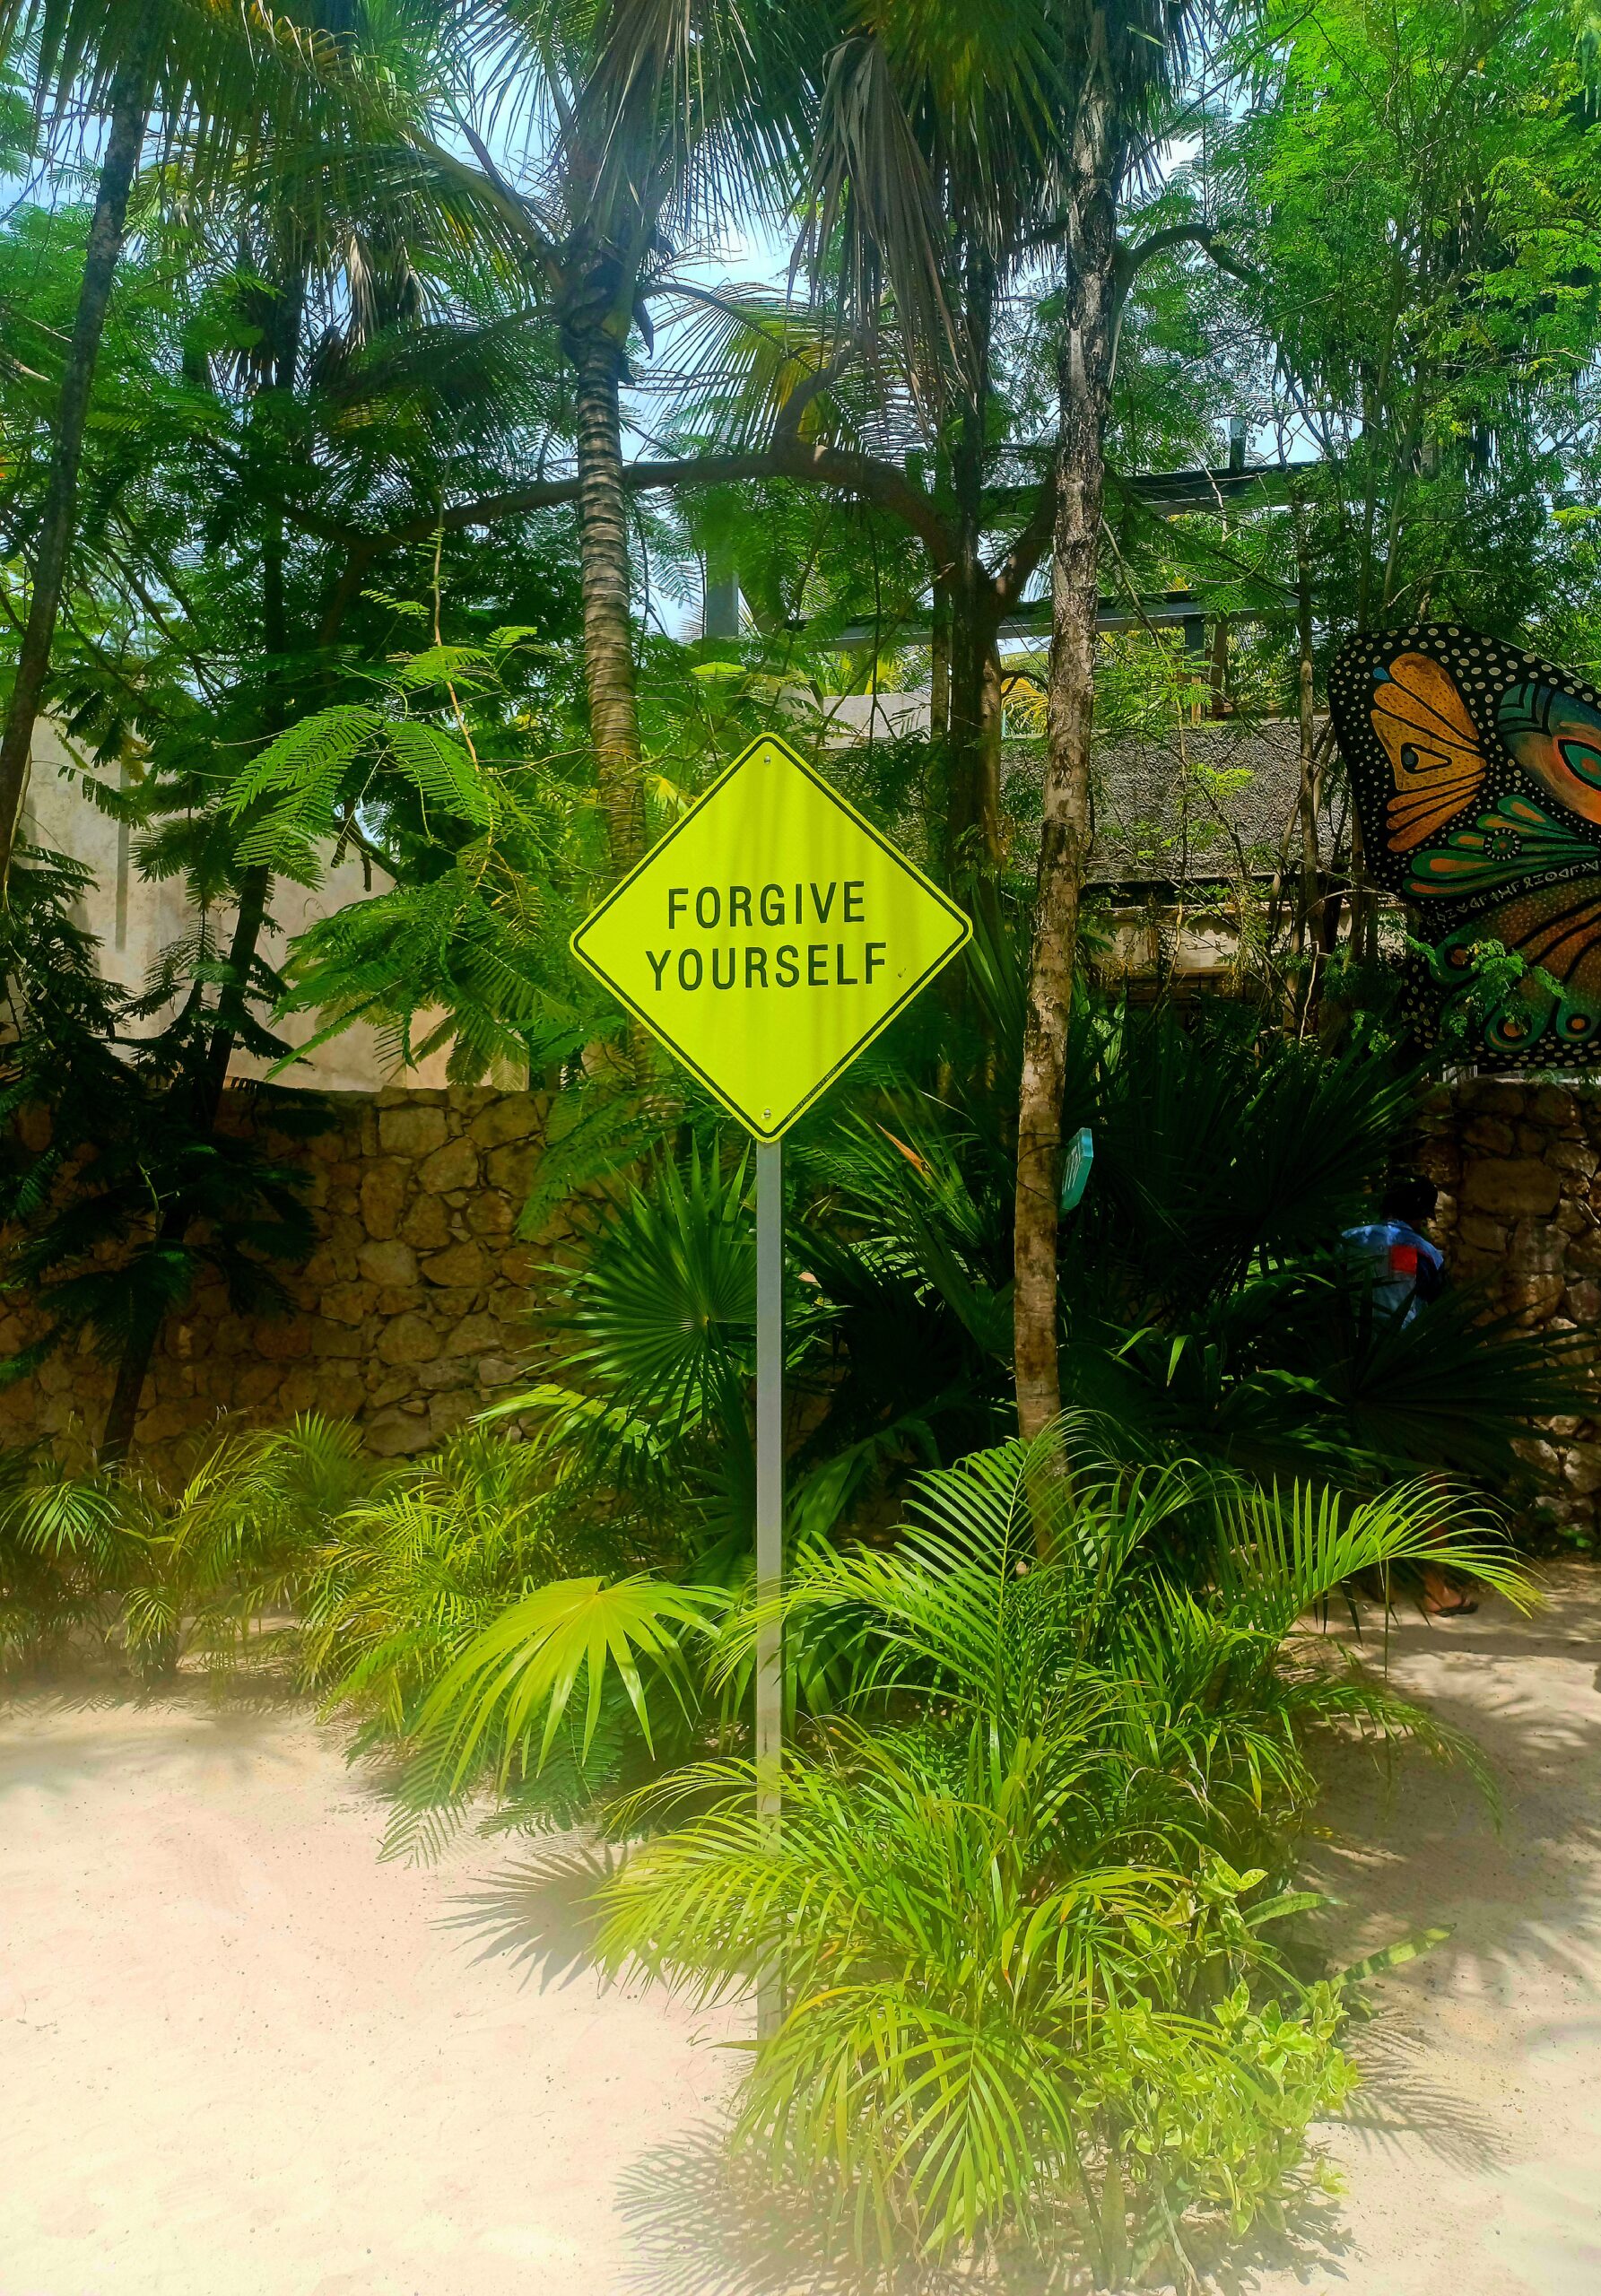 Forgive Yourself Sign
Tulum, Mexico